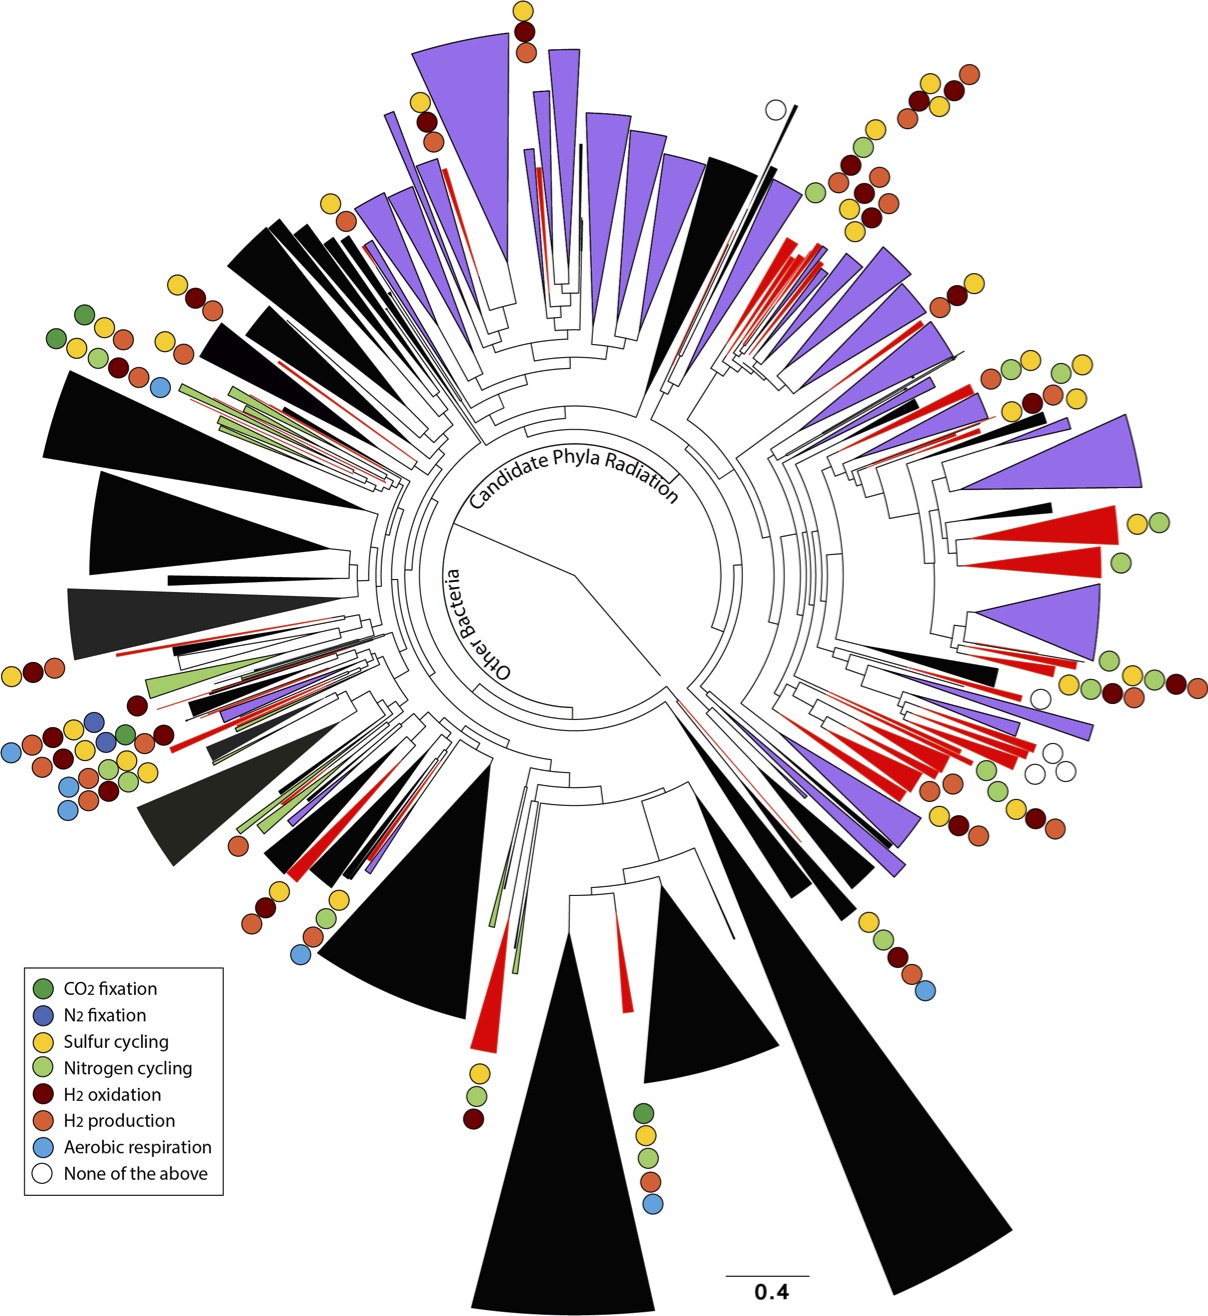 Stunning diversity, visualized. All the known major bacterial groups are represented by wedges in this circular “tree of life.” The bigger wedges are more diverse groups. Green wedges are groups that have not been genomically sampled at the Rifle site—everything else has. Black wedges are previously identified bacteria groups that have also been found at Rifle. Purple wedges are groups discovered at Rifle and announced last year. Red wedges are new groups discovered in this study. Colored dots represent important metabolism processes the new groups help mediate. (Credit: Banfield Group) 